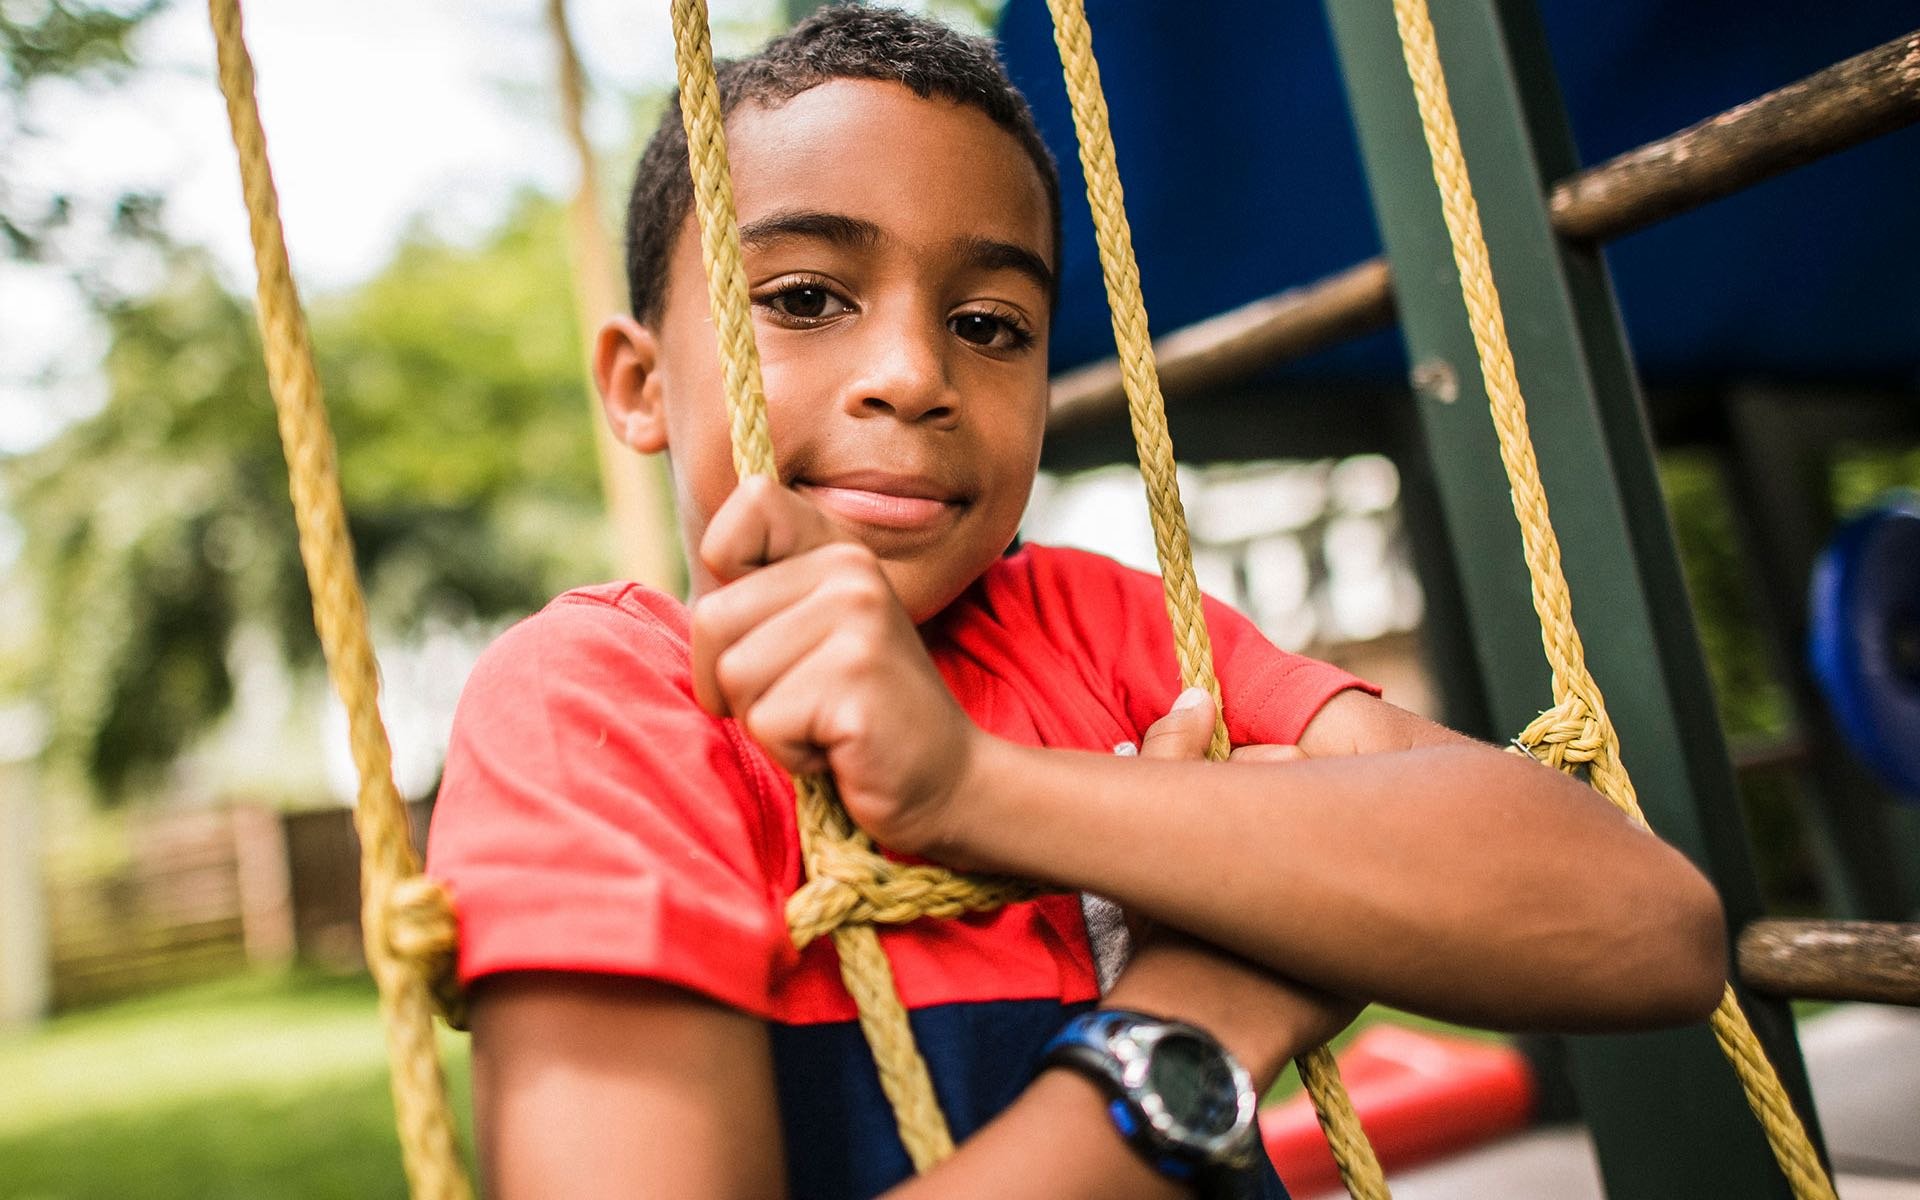 A grade school patient on a swing at a playground.